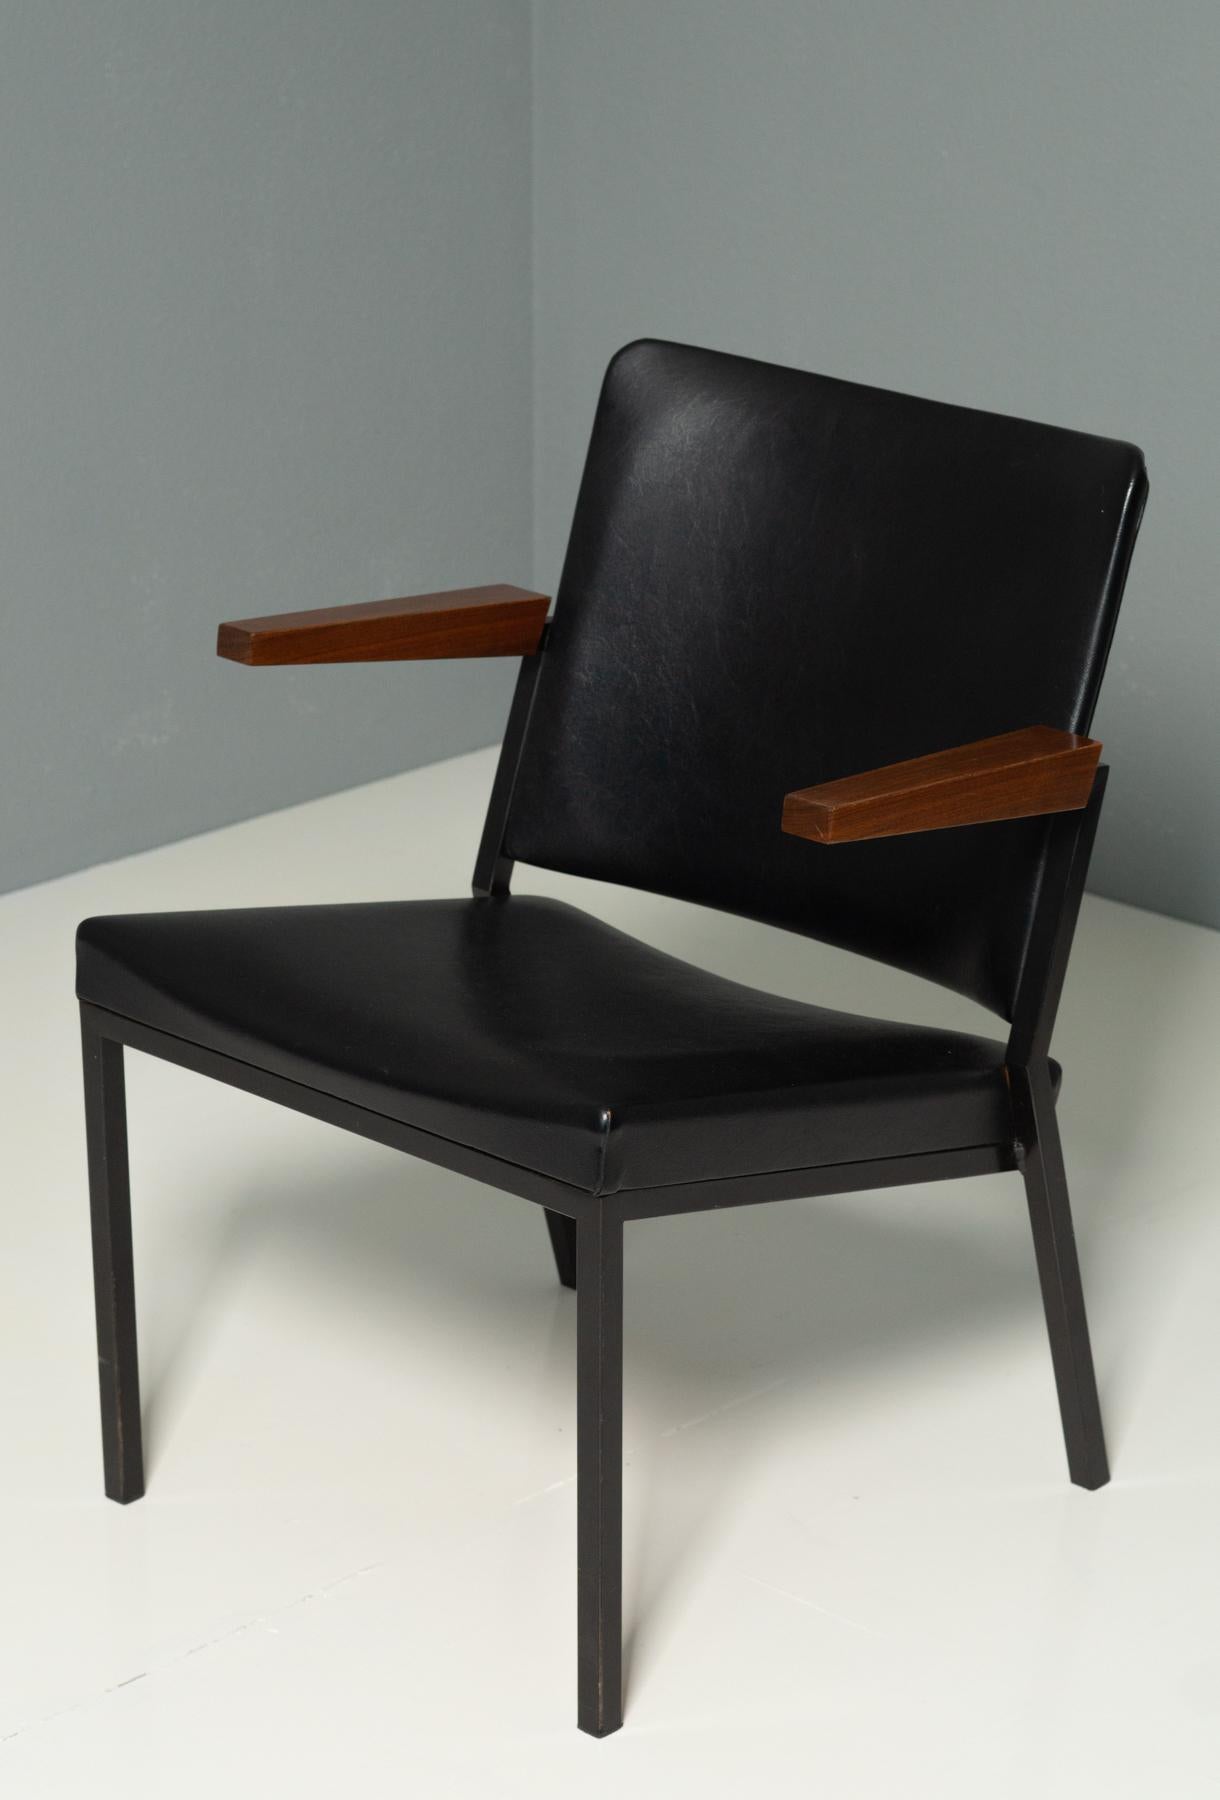 Cast W. Gispen for Emmeinstaal Model REAAL 9122-1 Lounge Chair from 1960'S